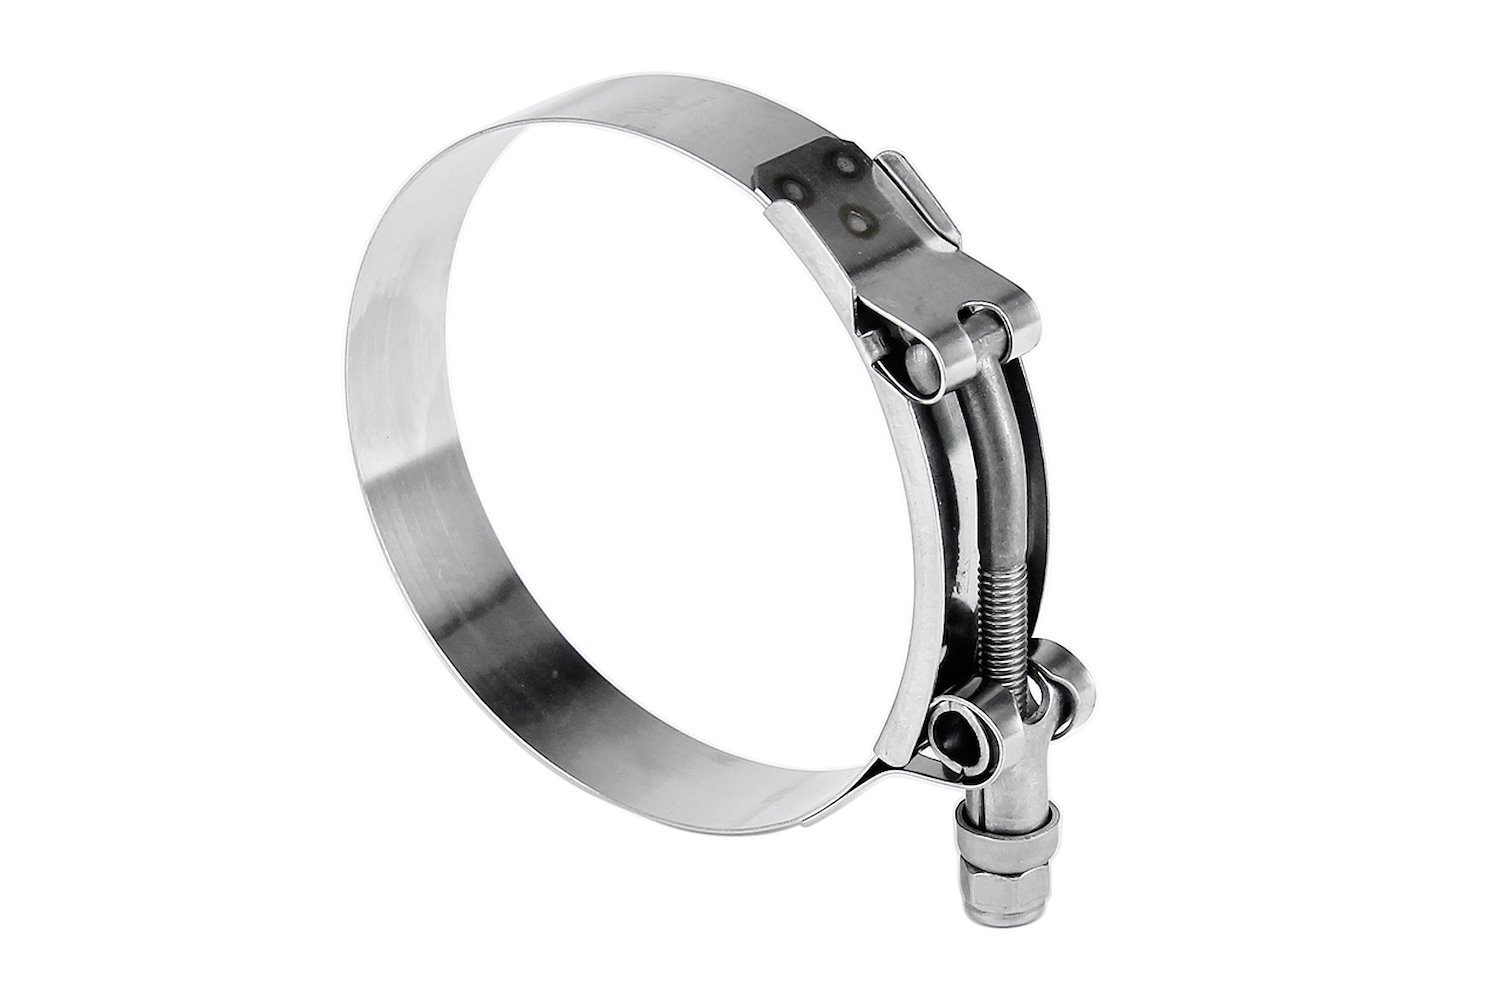 316-SSTC-153-161 100-Percent Marine Grade Stainless Steel T-Bolt Hose Clamp, Size #164, Range: 6 in.- 6.31 in.